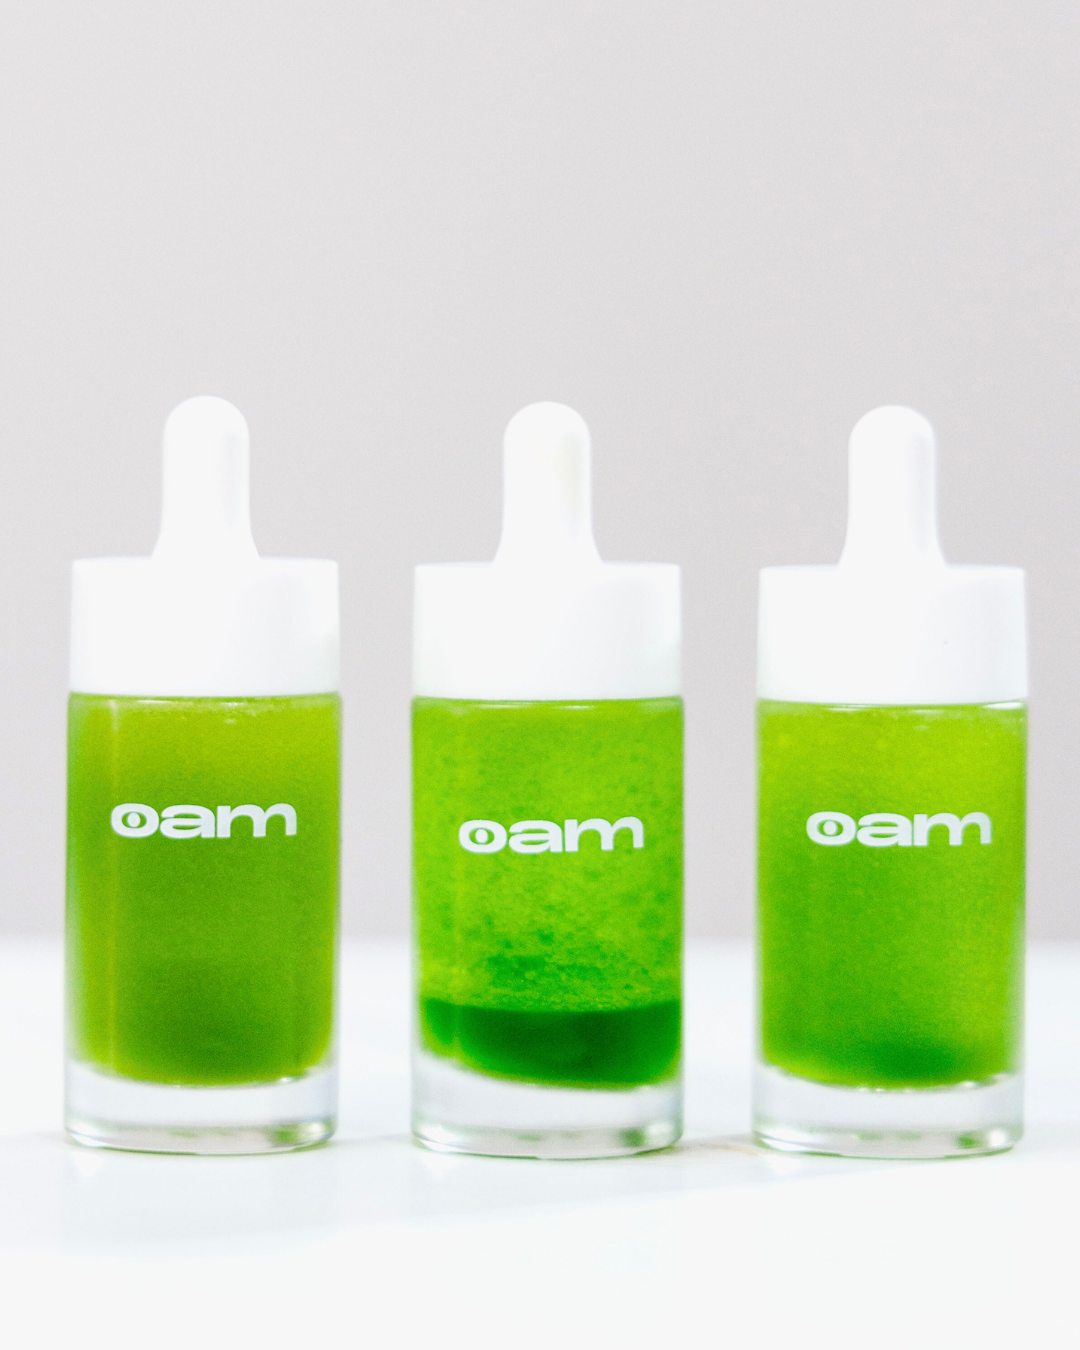 Three bottles of eyeam's hormone check drops lined up.